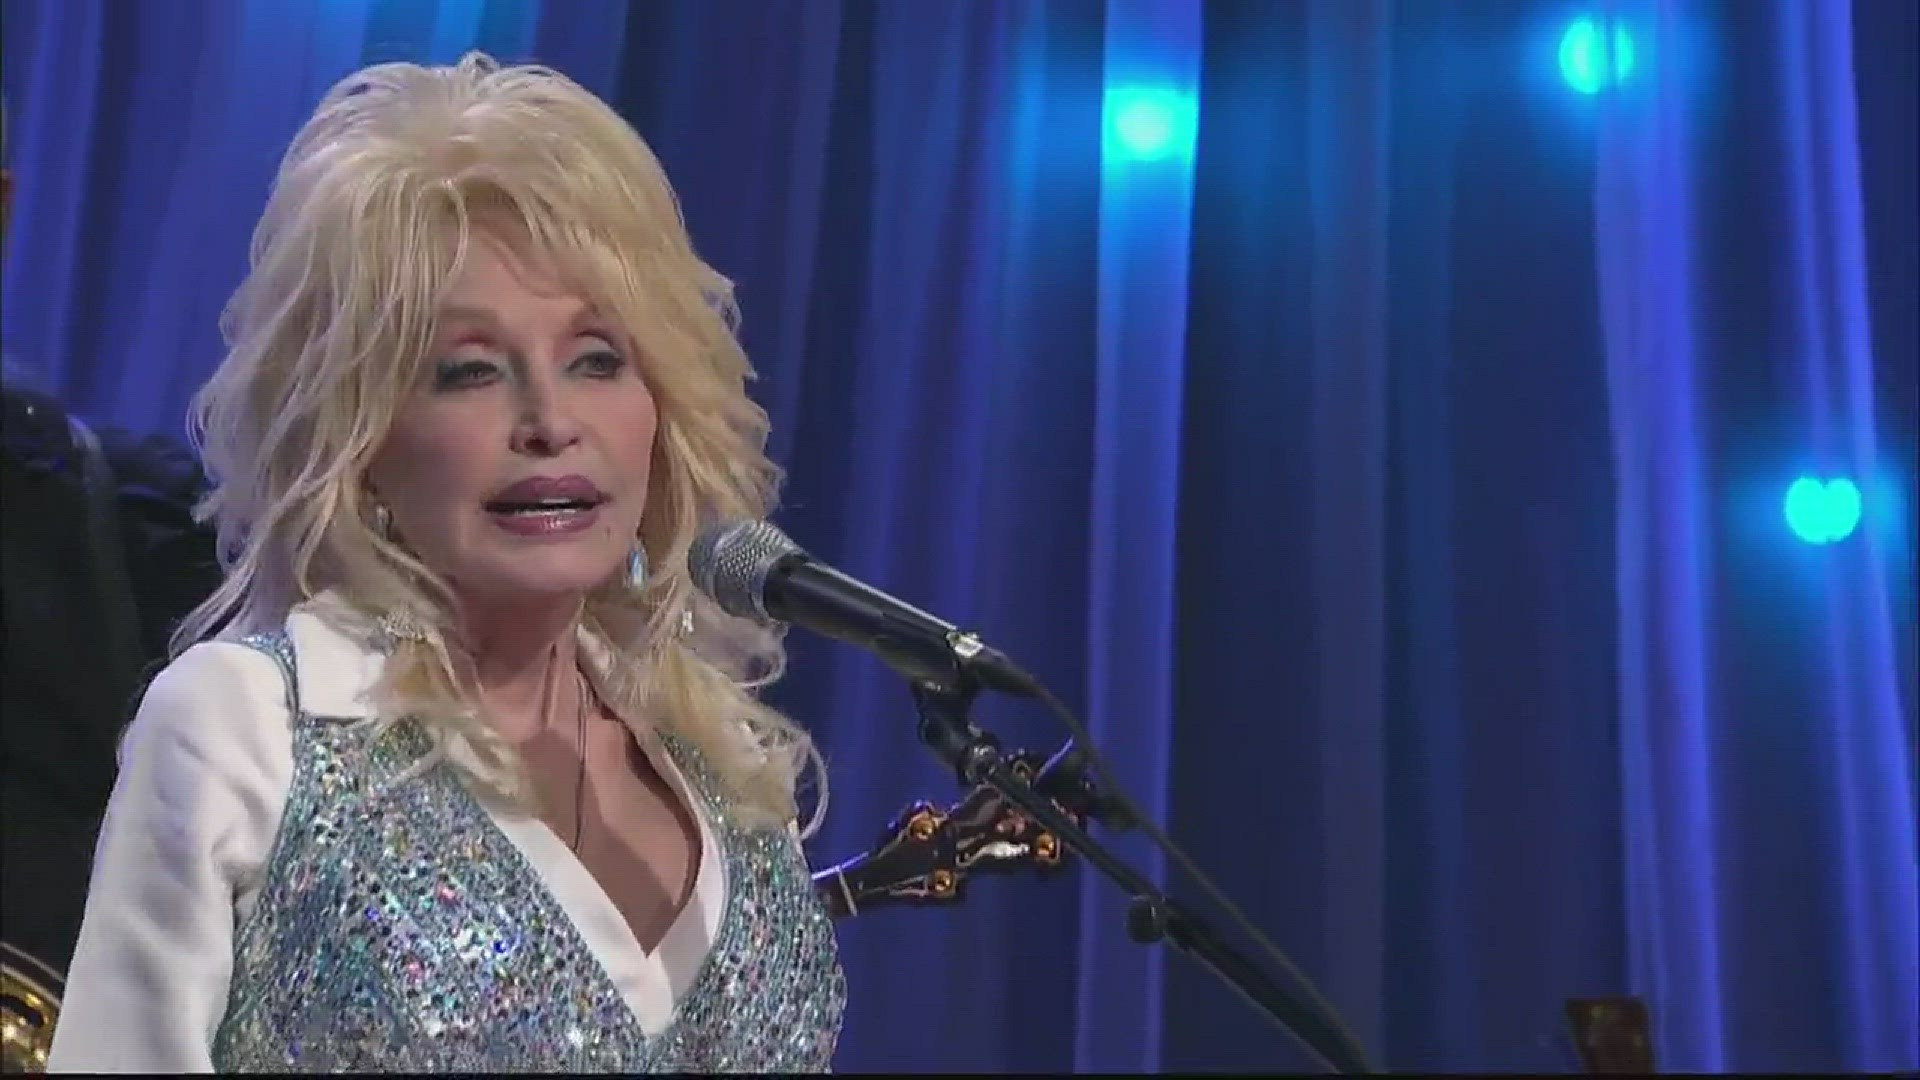 Dolly Parton performs My Mountains, My Home during the Smoky Mountains Rise telethon